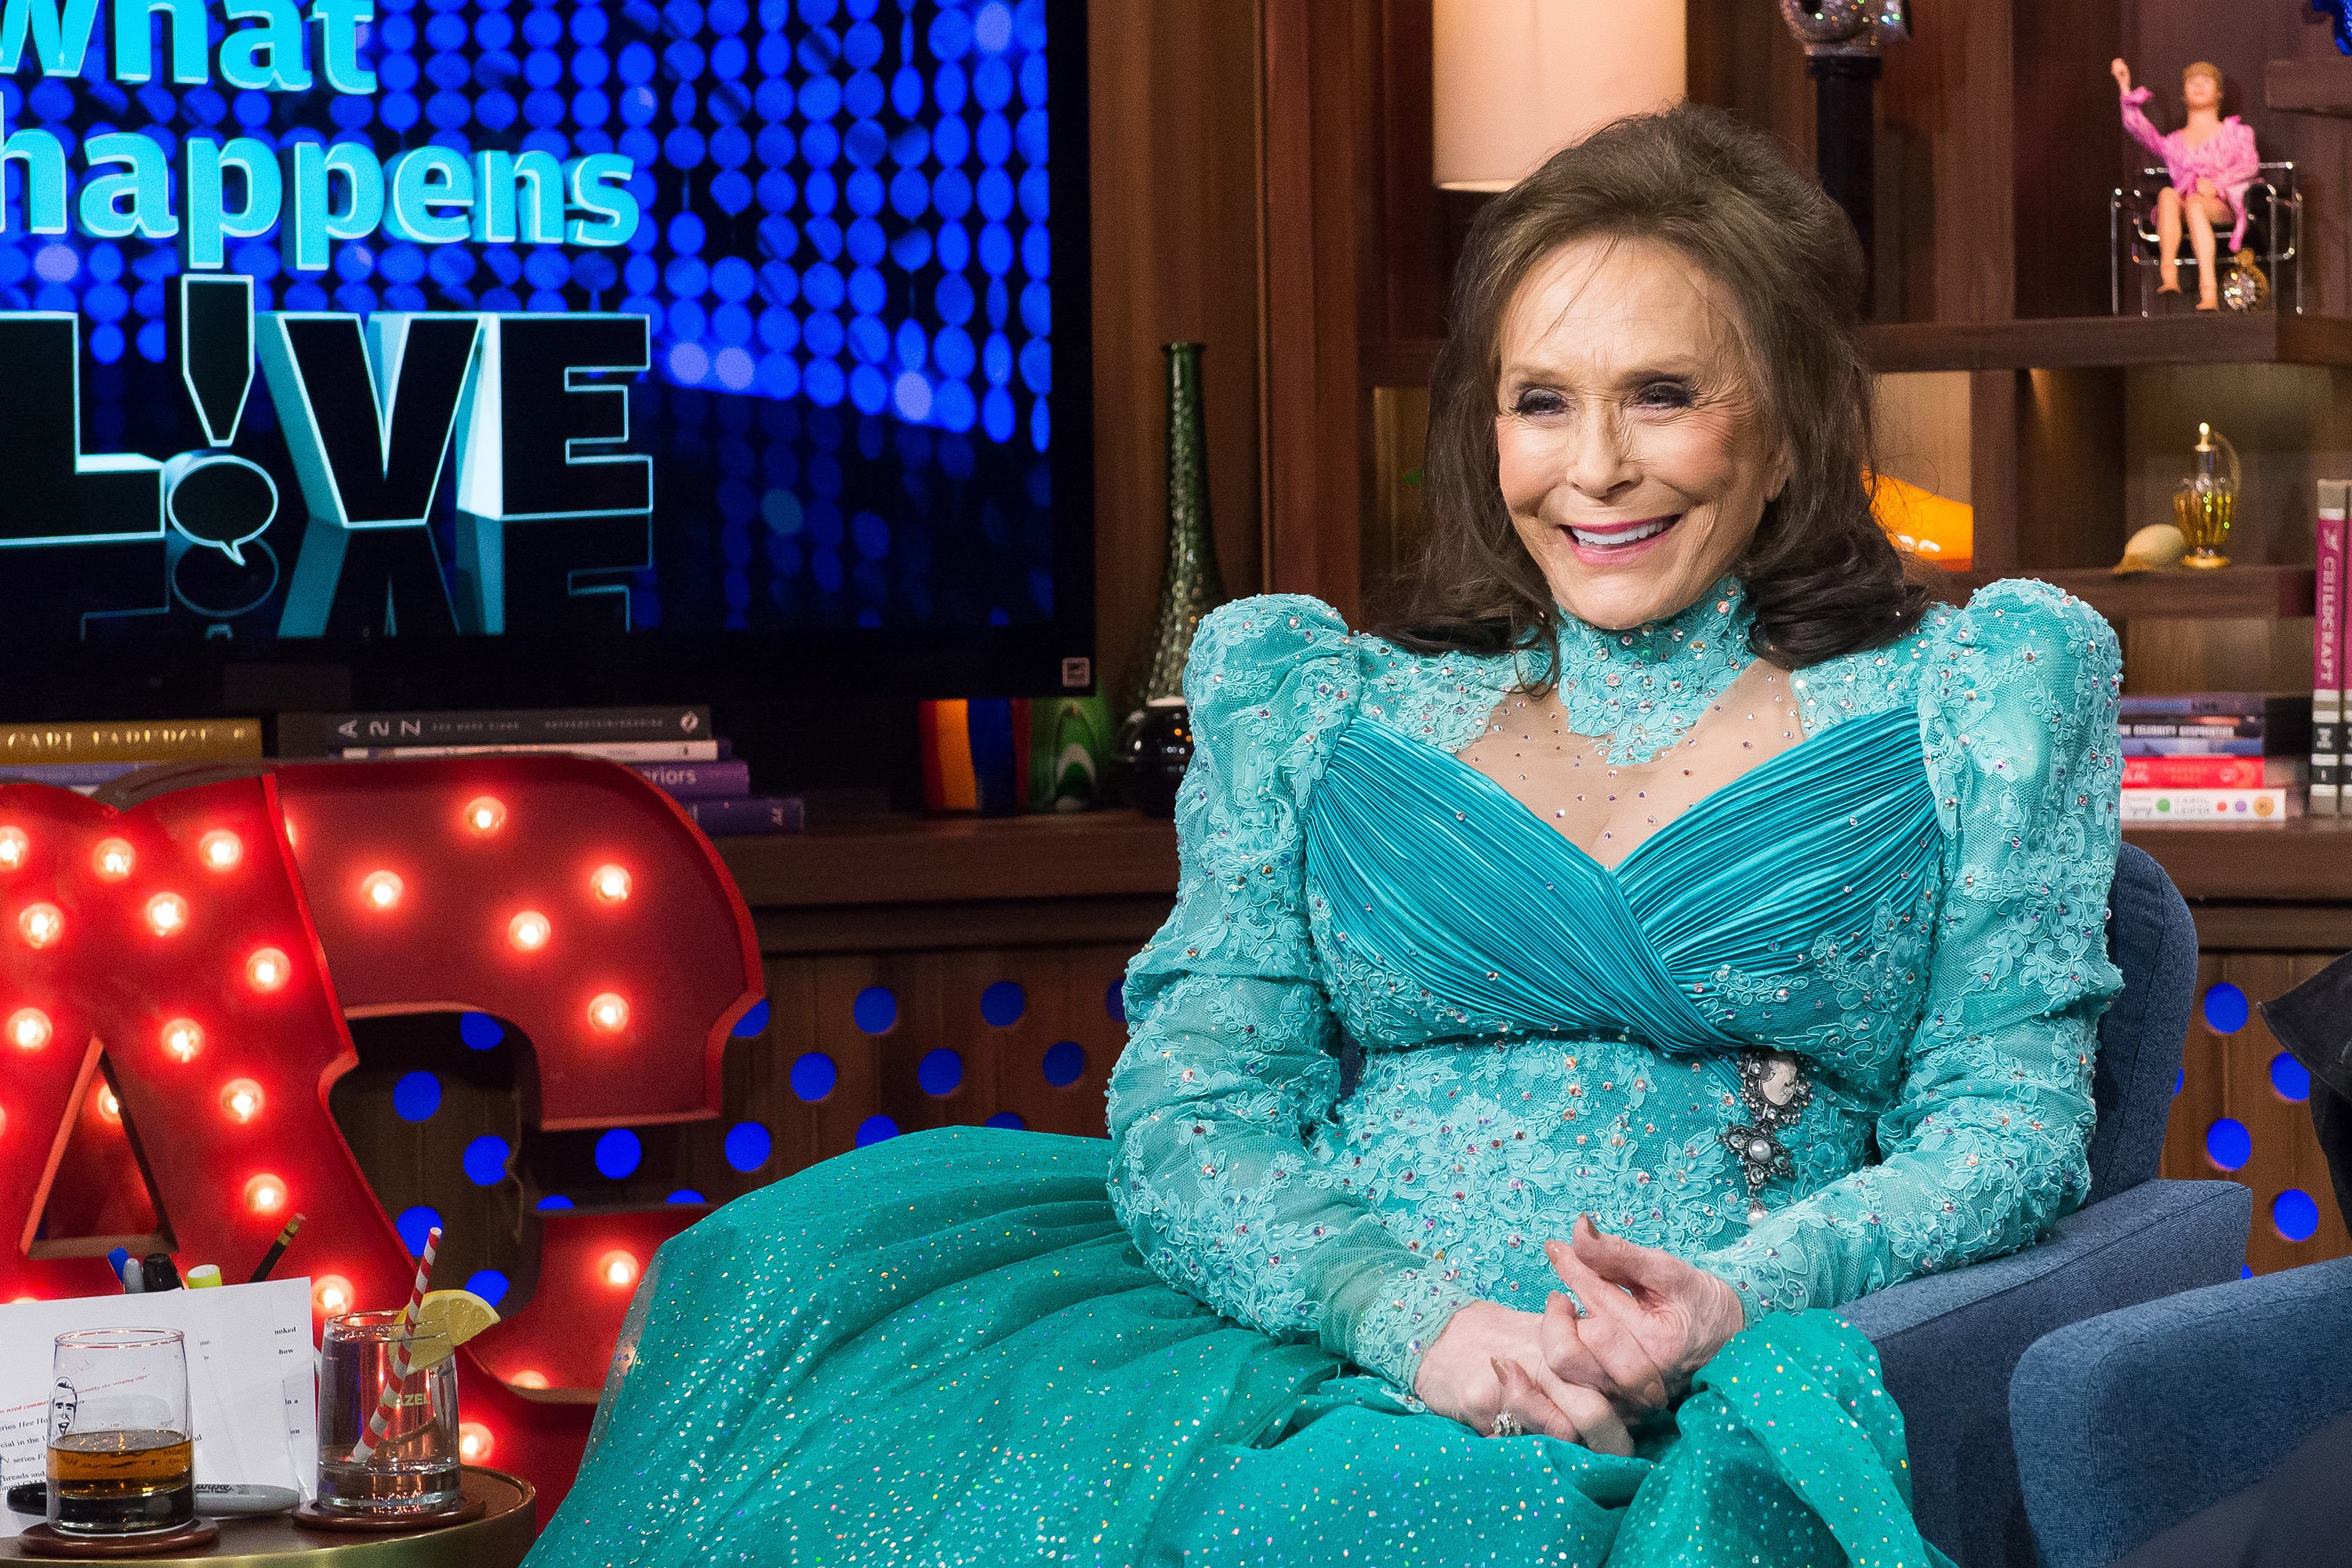 Loretta Lynn on season 13 of "Watch What Happens Live" | Sources: Getty Images